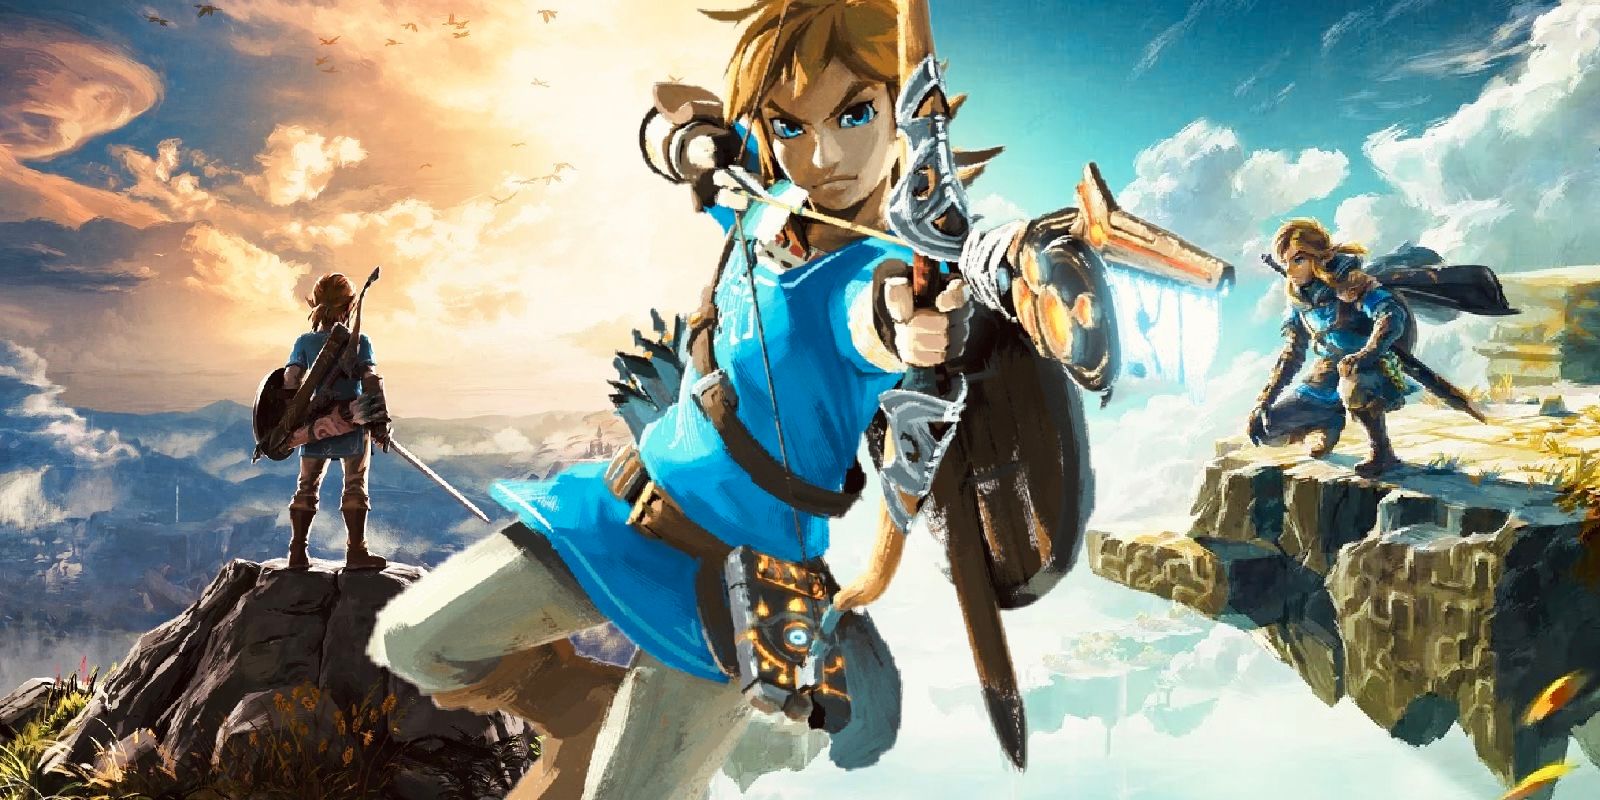 Link from Breath of the Wild with the cover art of BOTW and Tears of the Kingdom 